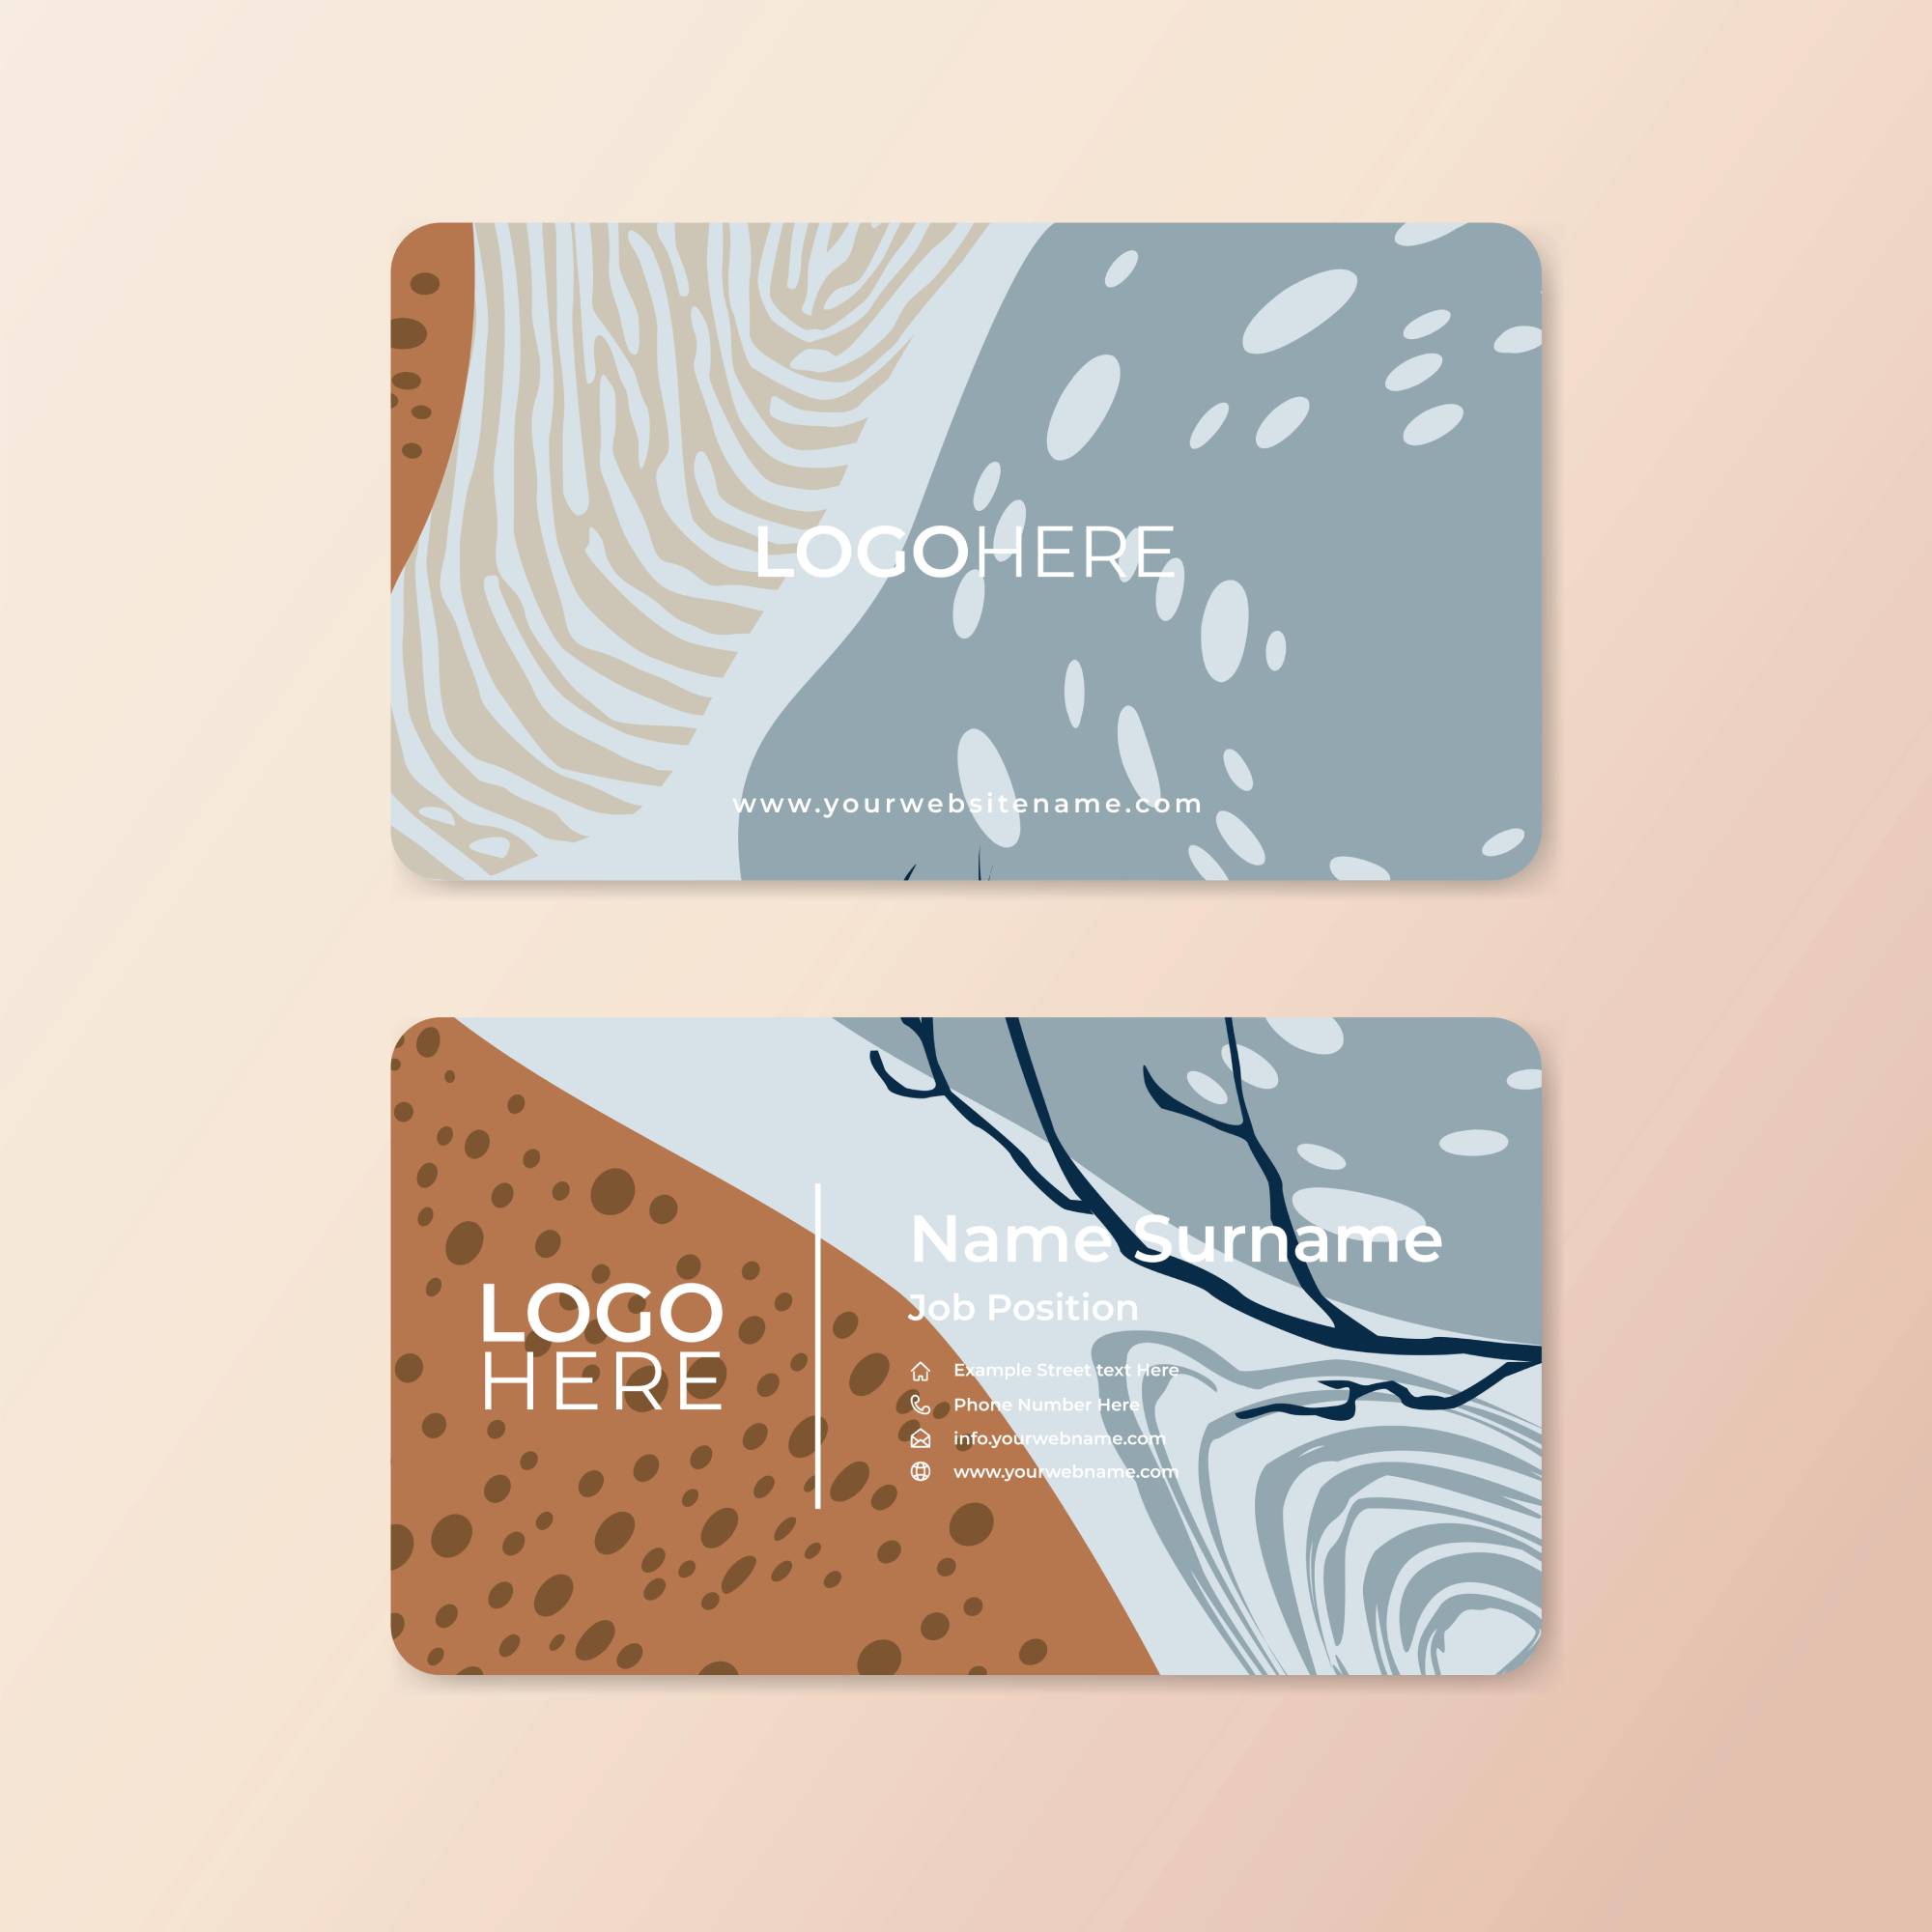 Why You Need Custom Business Cards for Your Etsy Store